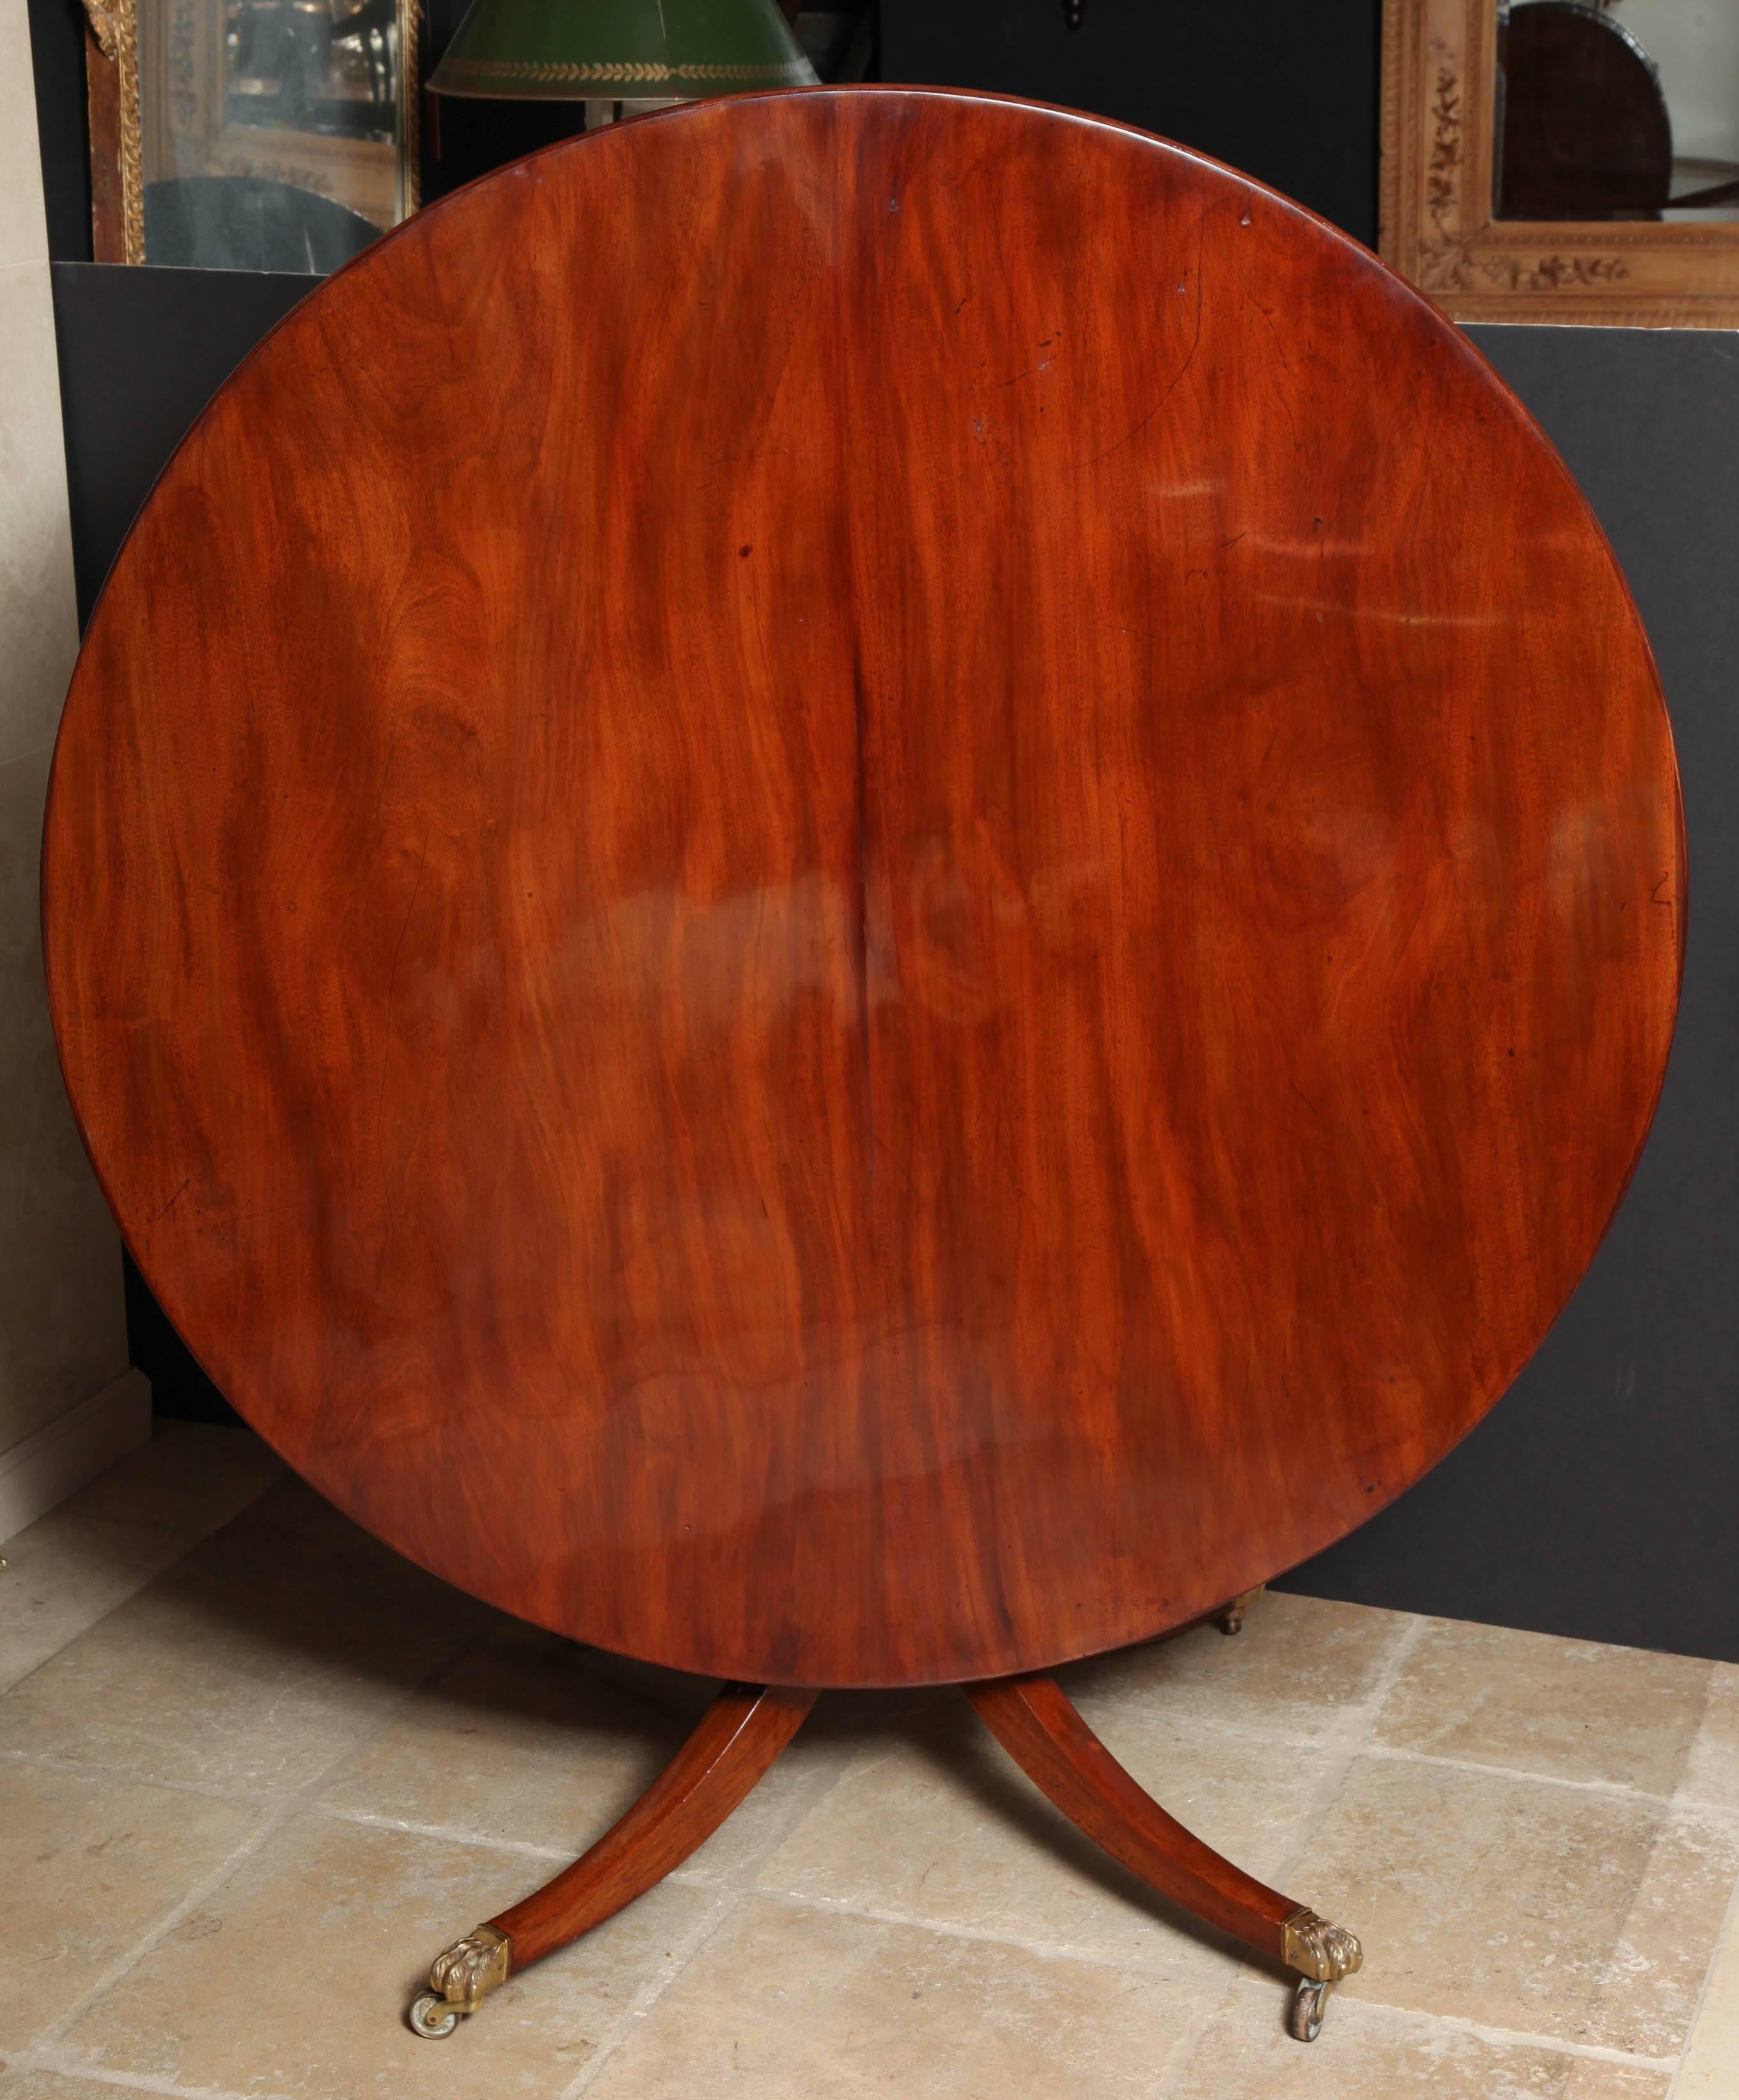 Good English Regency mahogany circular tilt center table or dining table, the top with double molded edge, raised on a quatropod pedestal support with brass paw casters.